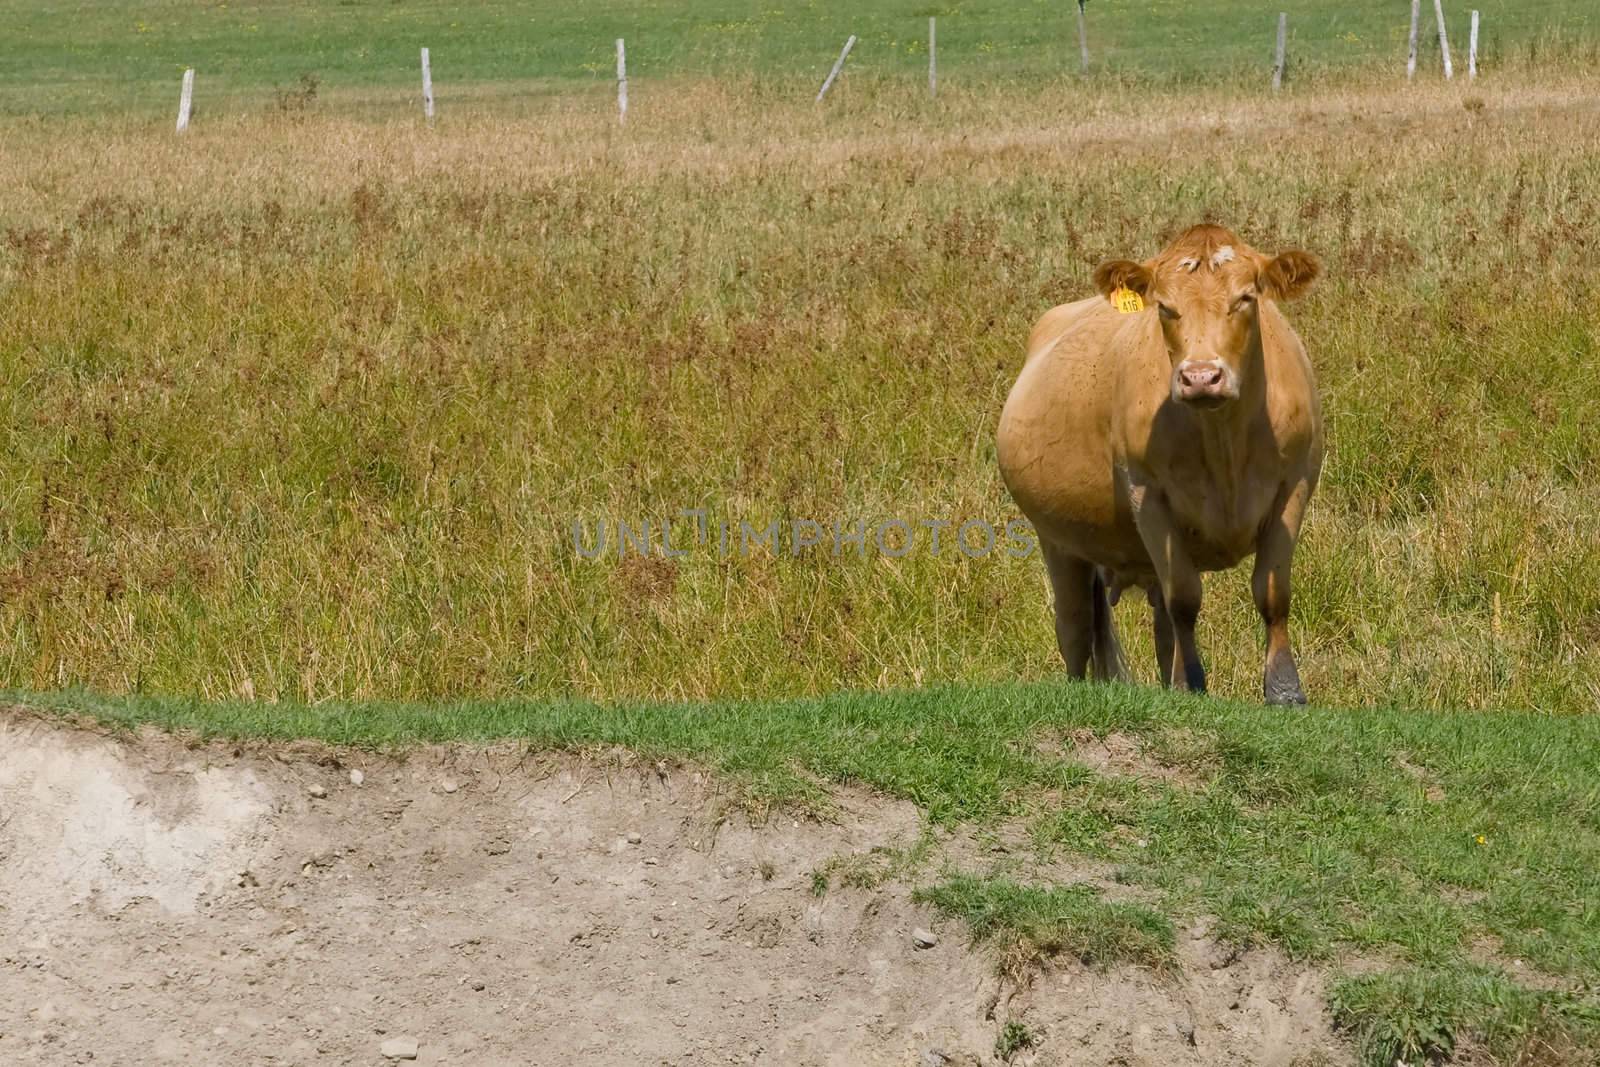 A lone cow looking towards the camera, with a fence in the distance.